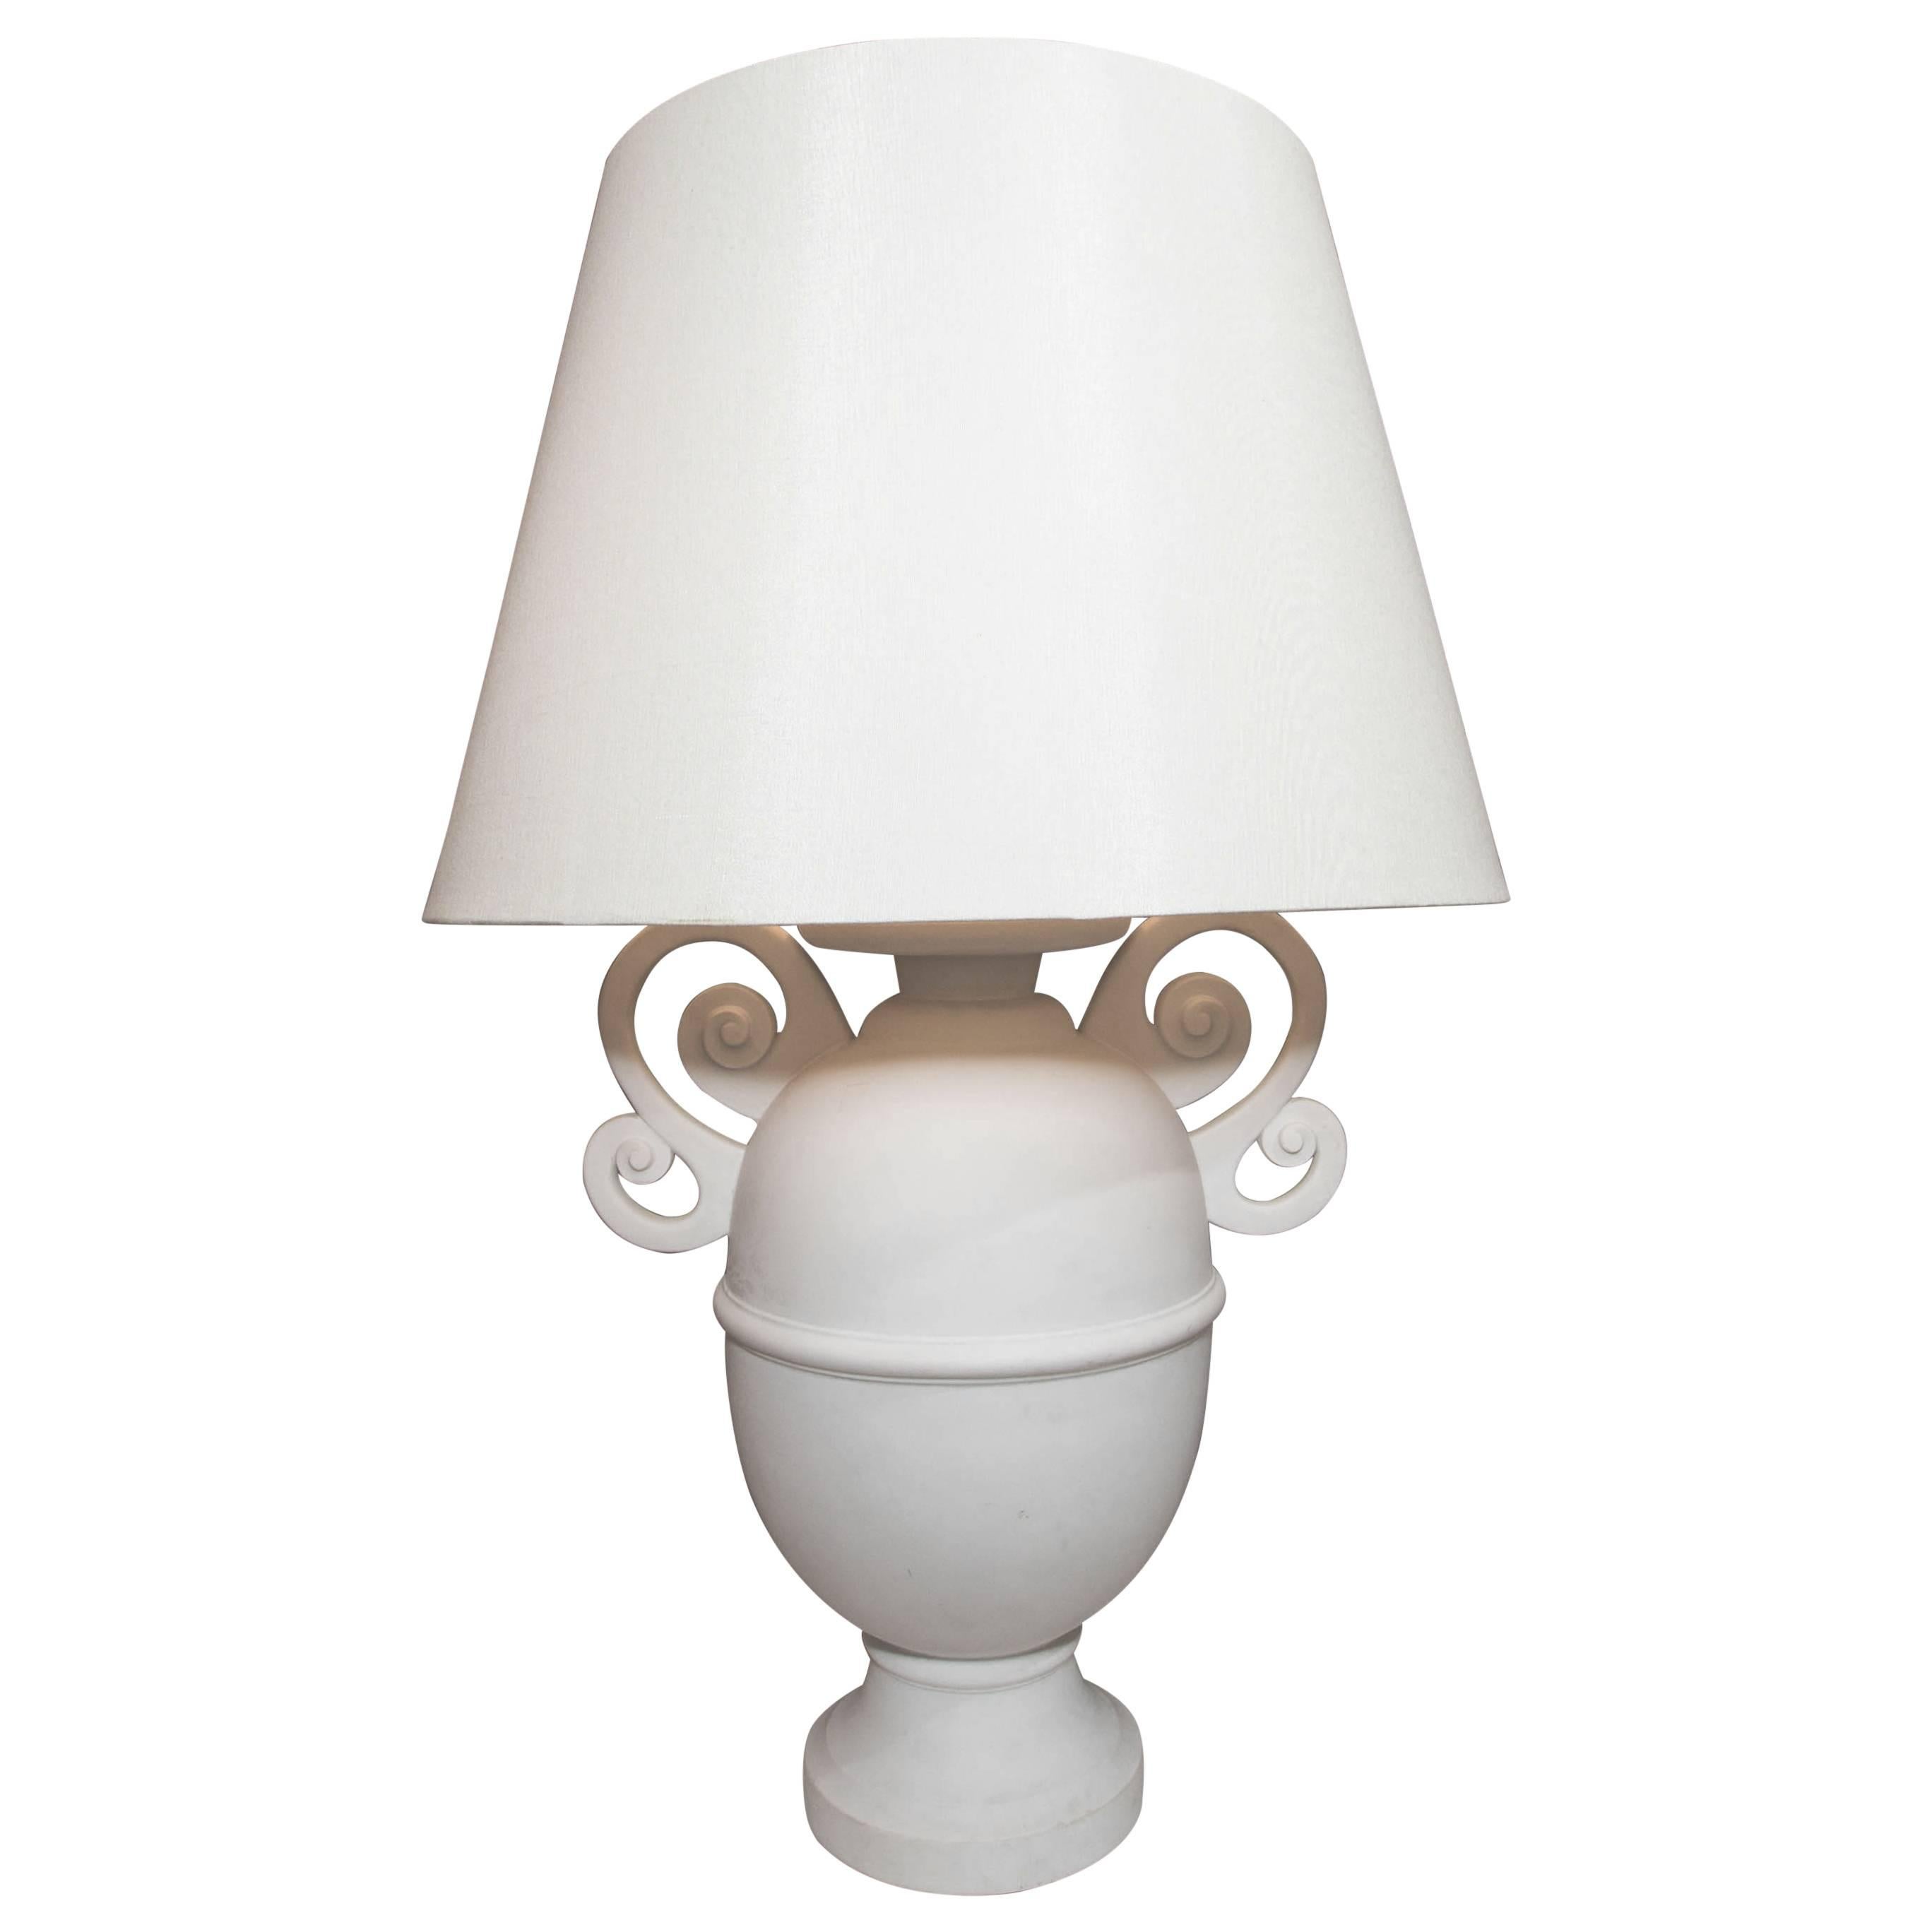 Giocometti Style Urn-Shaped Lamp with White Matte Finish For Sale